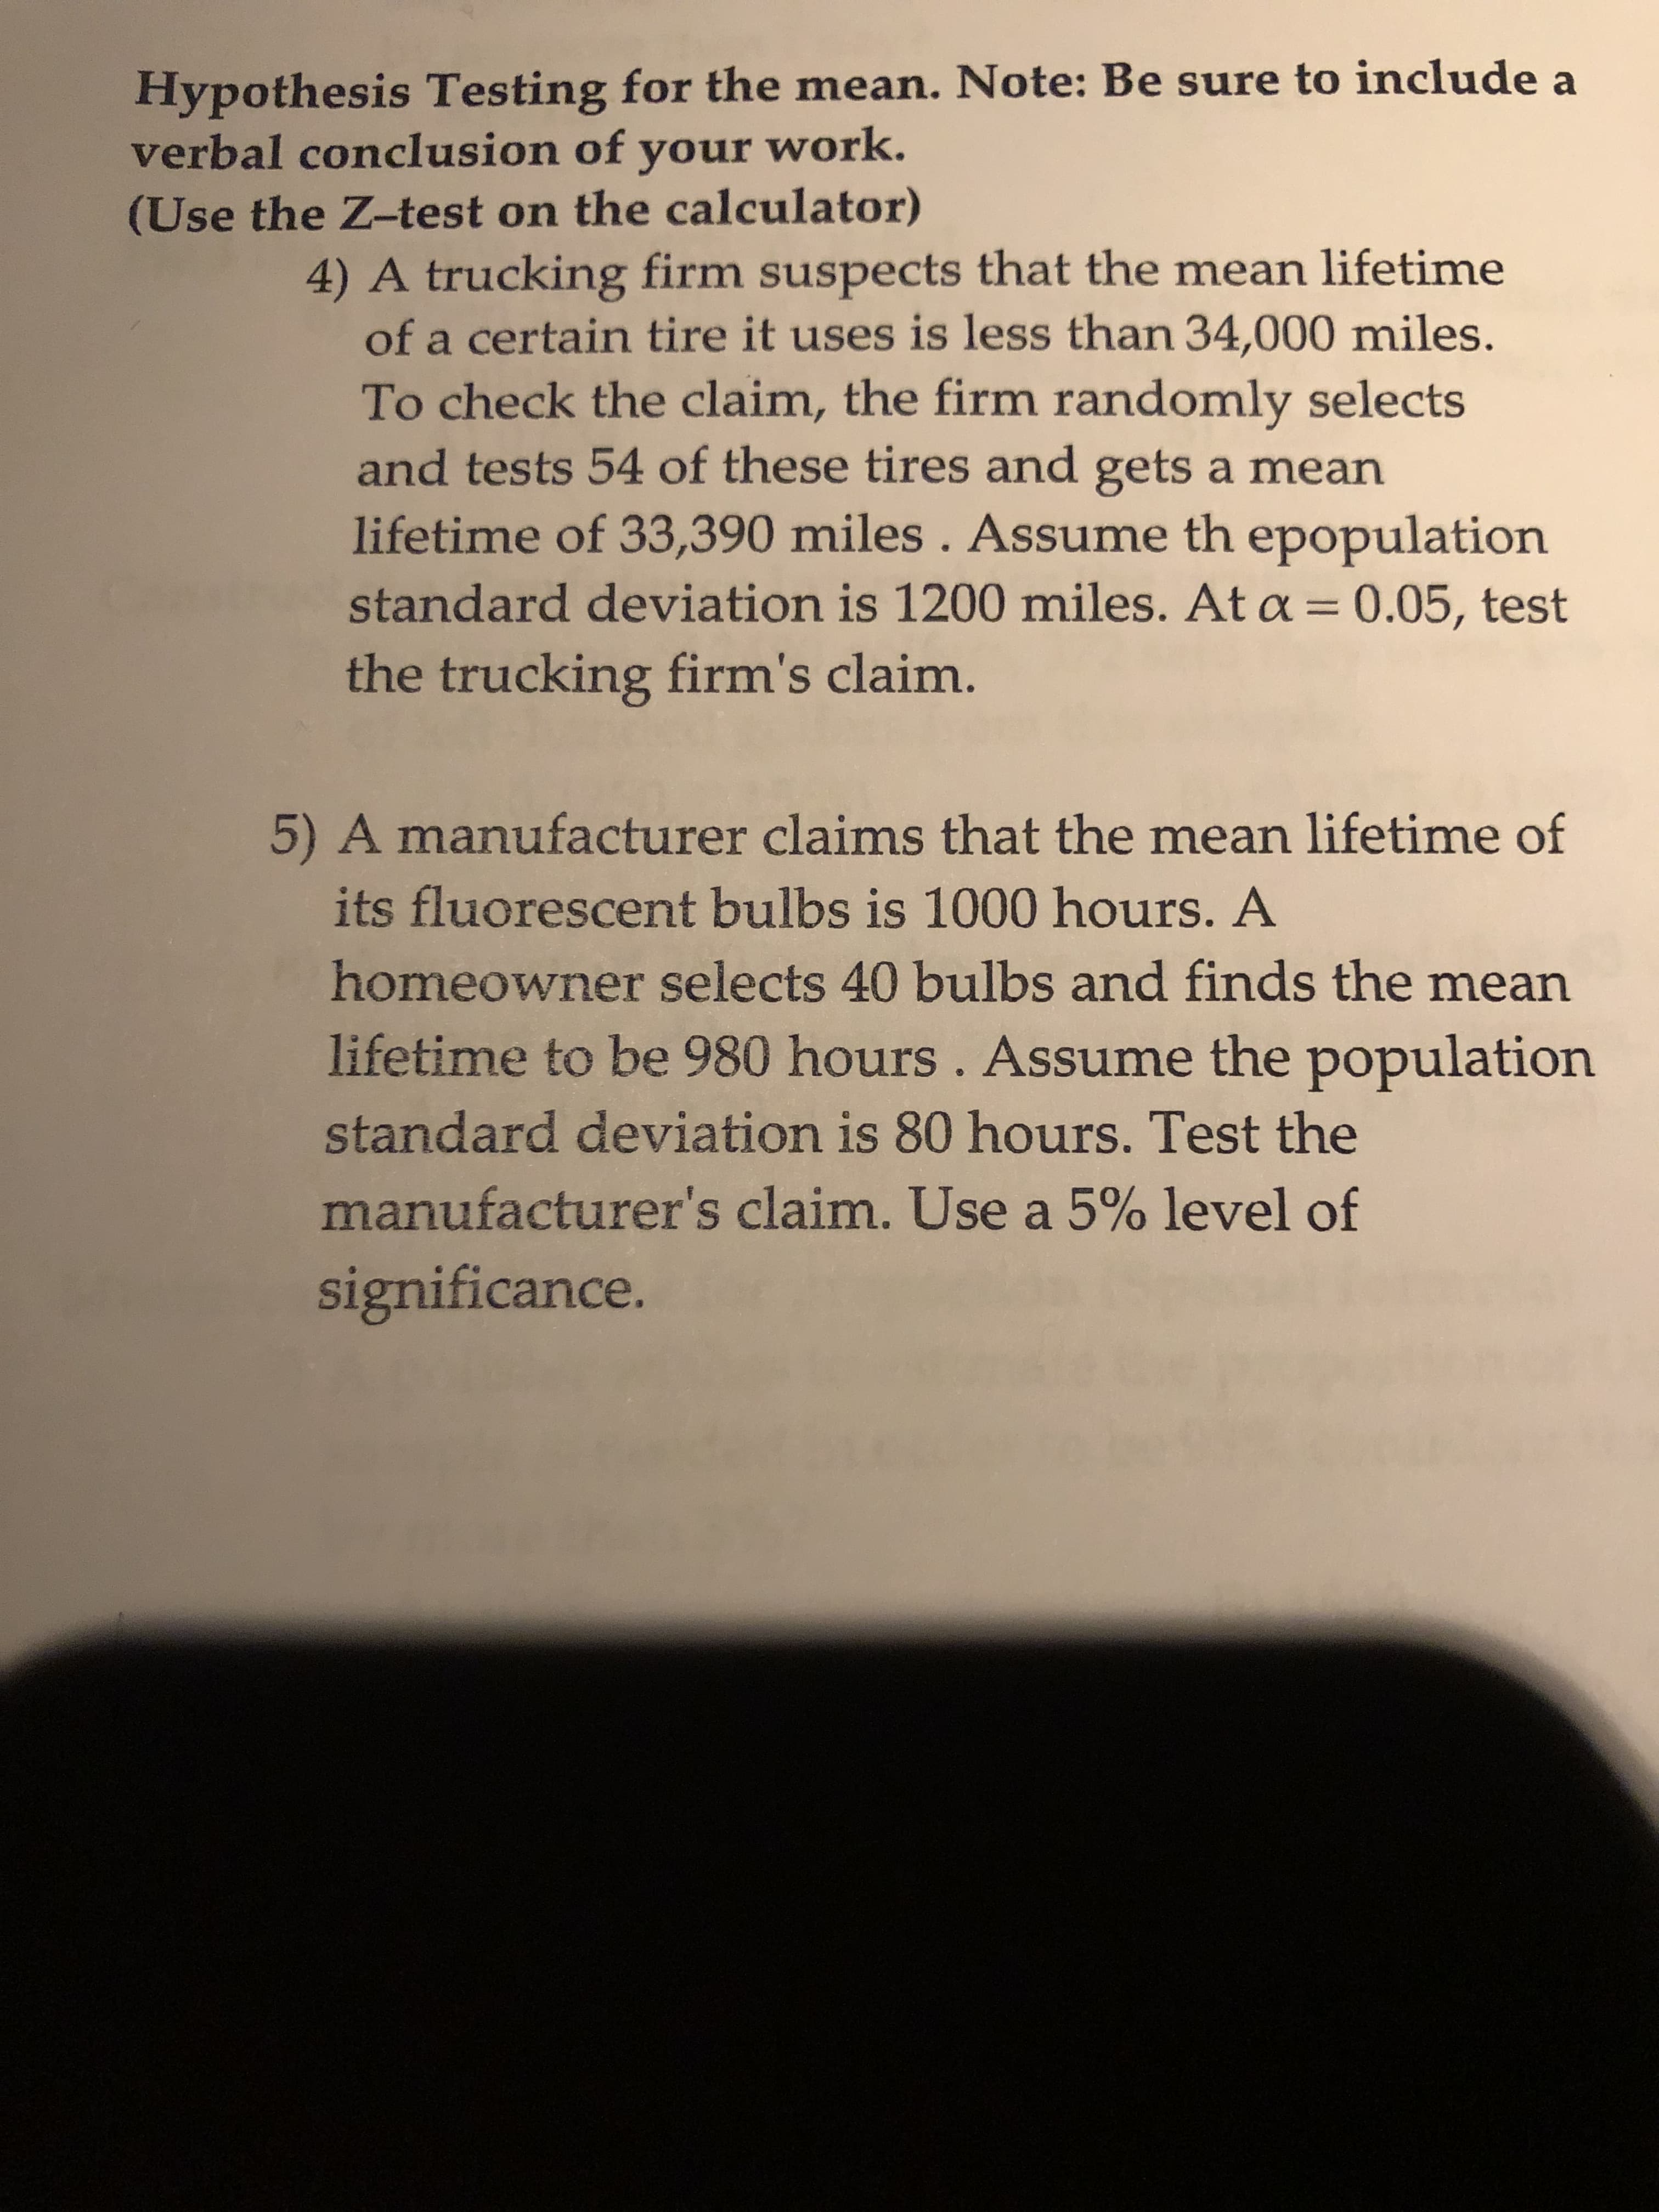 Hypothesis Testing for the mean. Note: Be sure to include a
verbal conclusion of your work.
(Use the Z-test on the calculator)
4) A trucking firm suspects that the mean lifetime
of a certain tire it uses is less than 34,000 miles.
To check the claim, the firm randomly selects
and tests 54 of these tires and gets a mean
lifetime of 33,390 miles. Assume th epopulation
standard deviation is 1200 miles. At a = 0.05, test
the trucking firm's claim.
5) A manufacturer claims that the mean lifetime of
its fluorescent bulbs is 1000 hours. A
homeowner selects 40 bulbs and finds the mean
lifetime to be 980 hours . Assume the population
standard deviation is 80 hours. Test the
manufacturer's claim. Use a 5% level of
significance.
